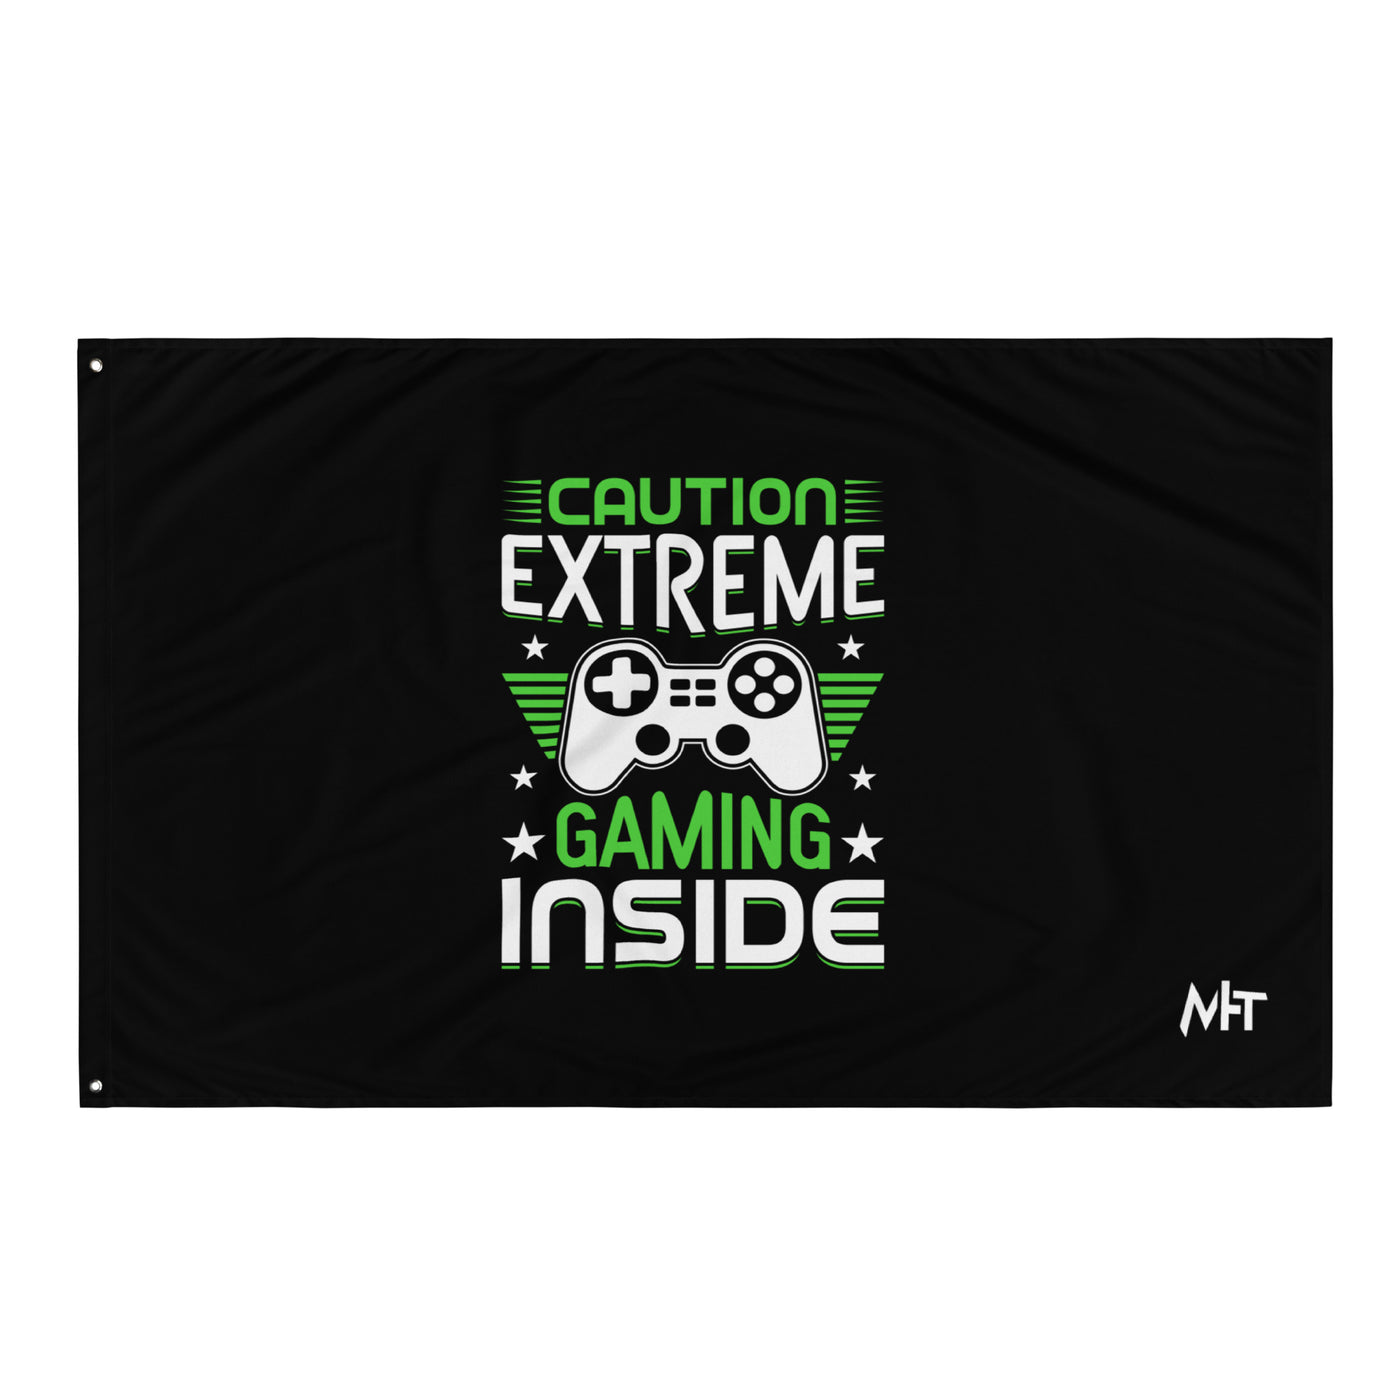 Caution extreme gaming inside - Flag